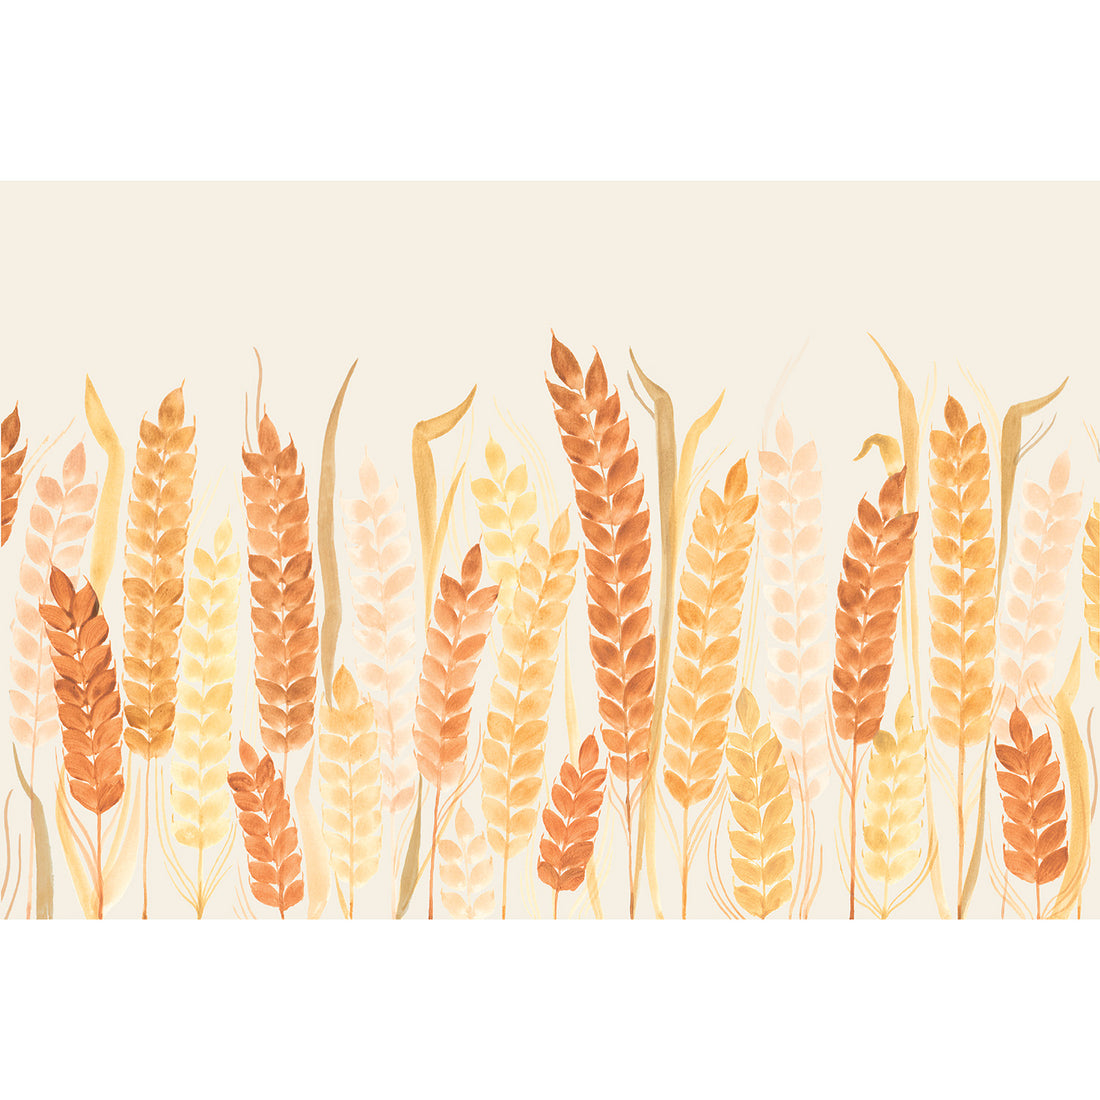 Delicately painted heads of wheat with stems and leaves, in vibrant gold, deep orange, and pale orange on a white background. 